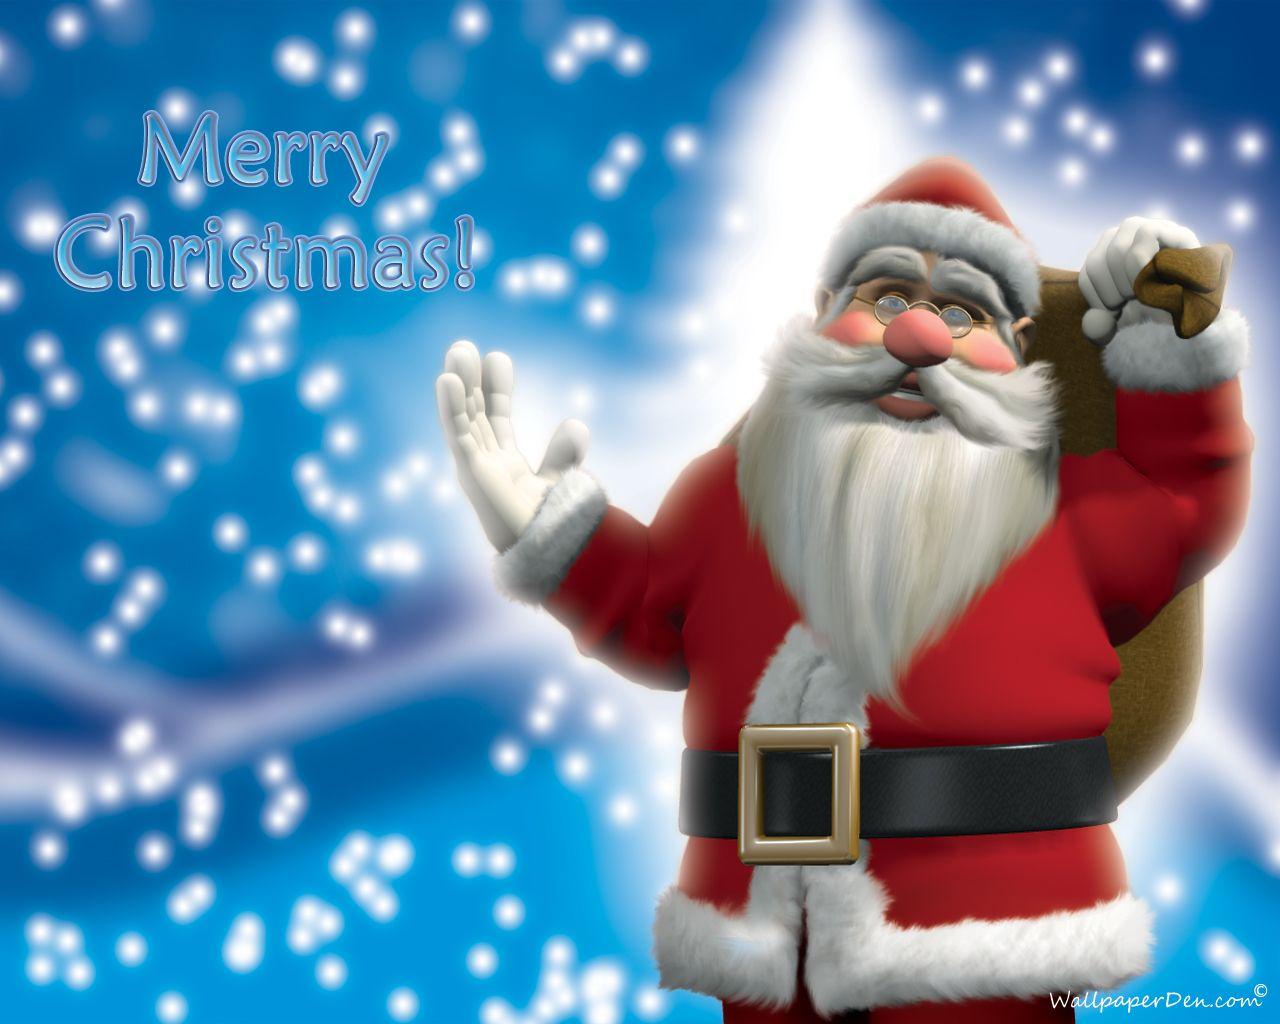 Merry Christmas With Santa Claus Wallpapers - Wallpaper Cave